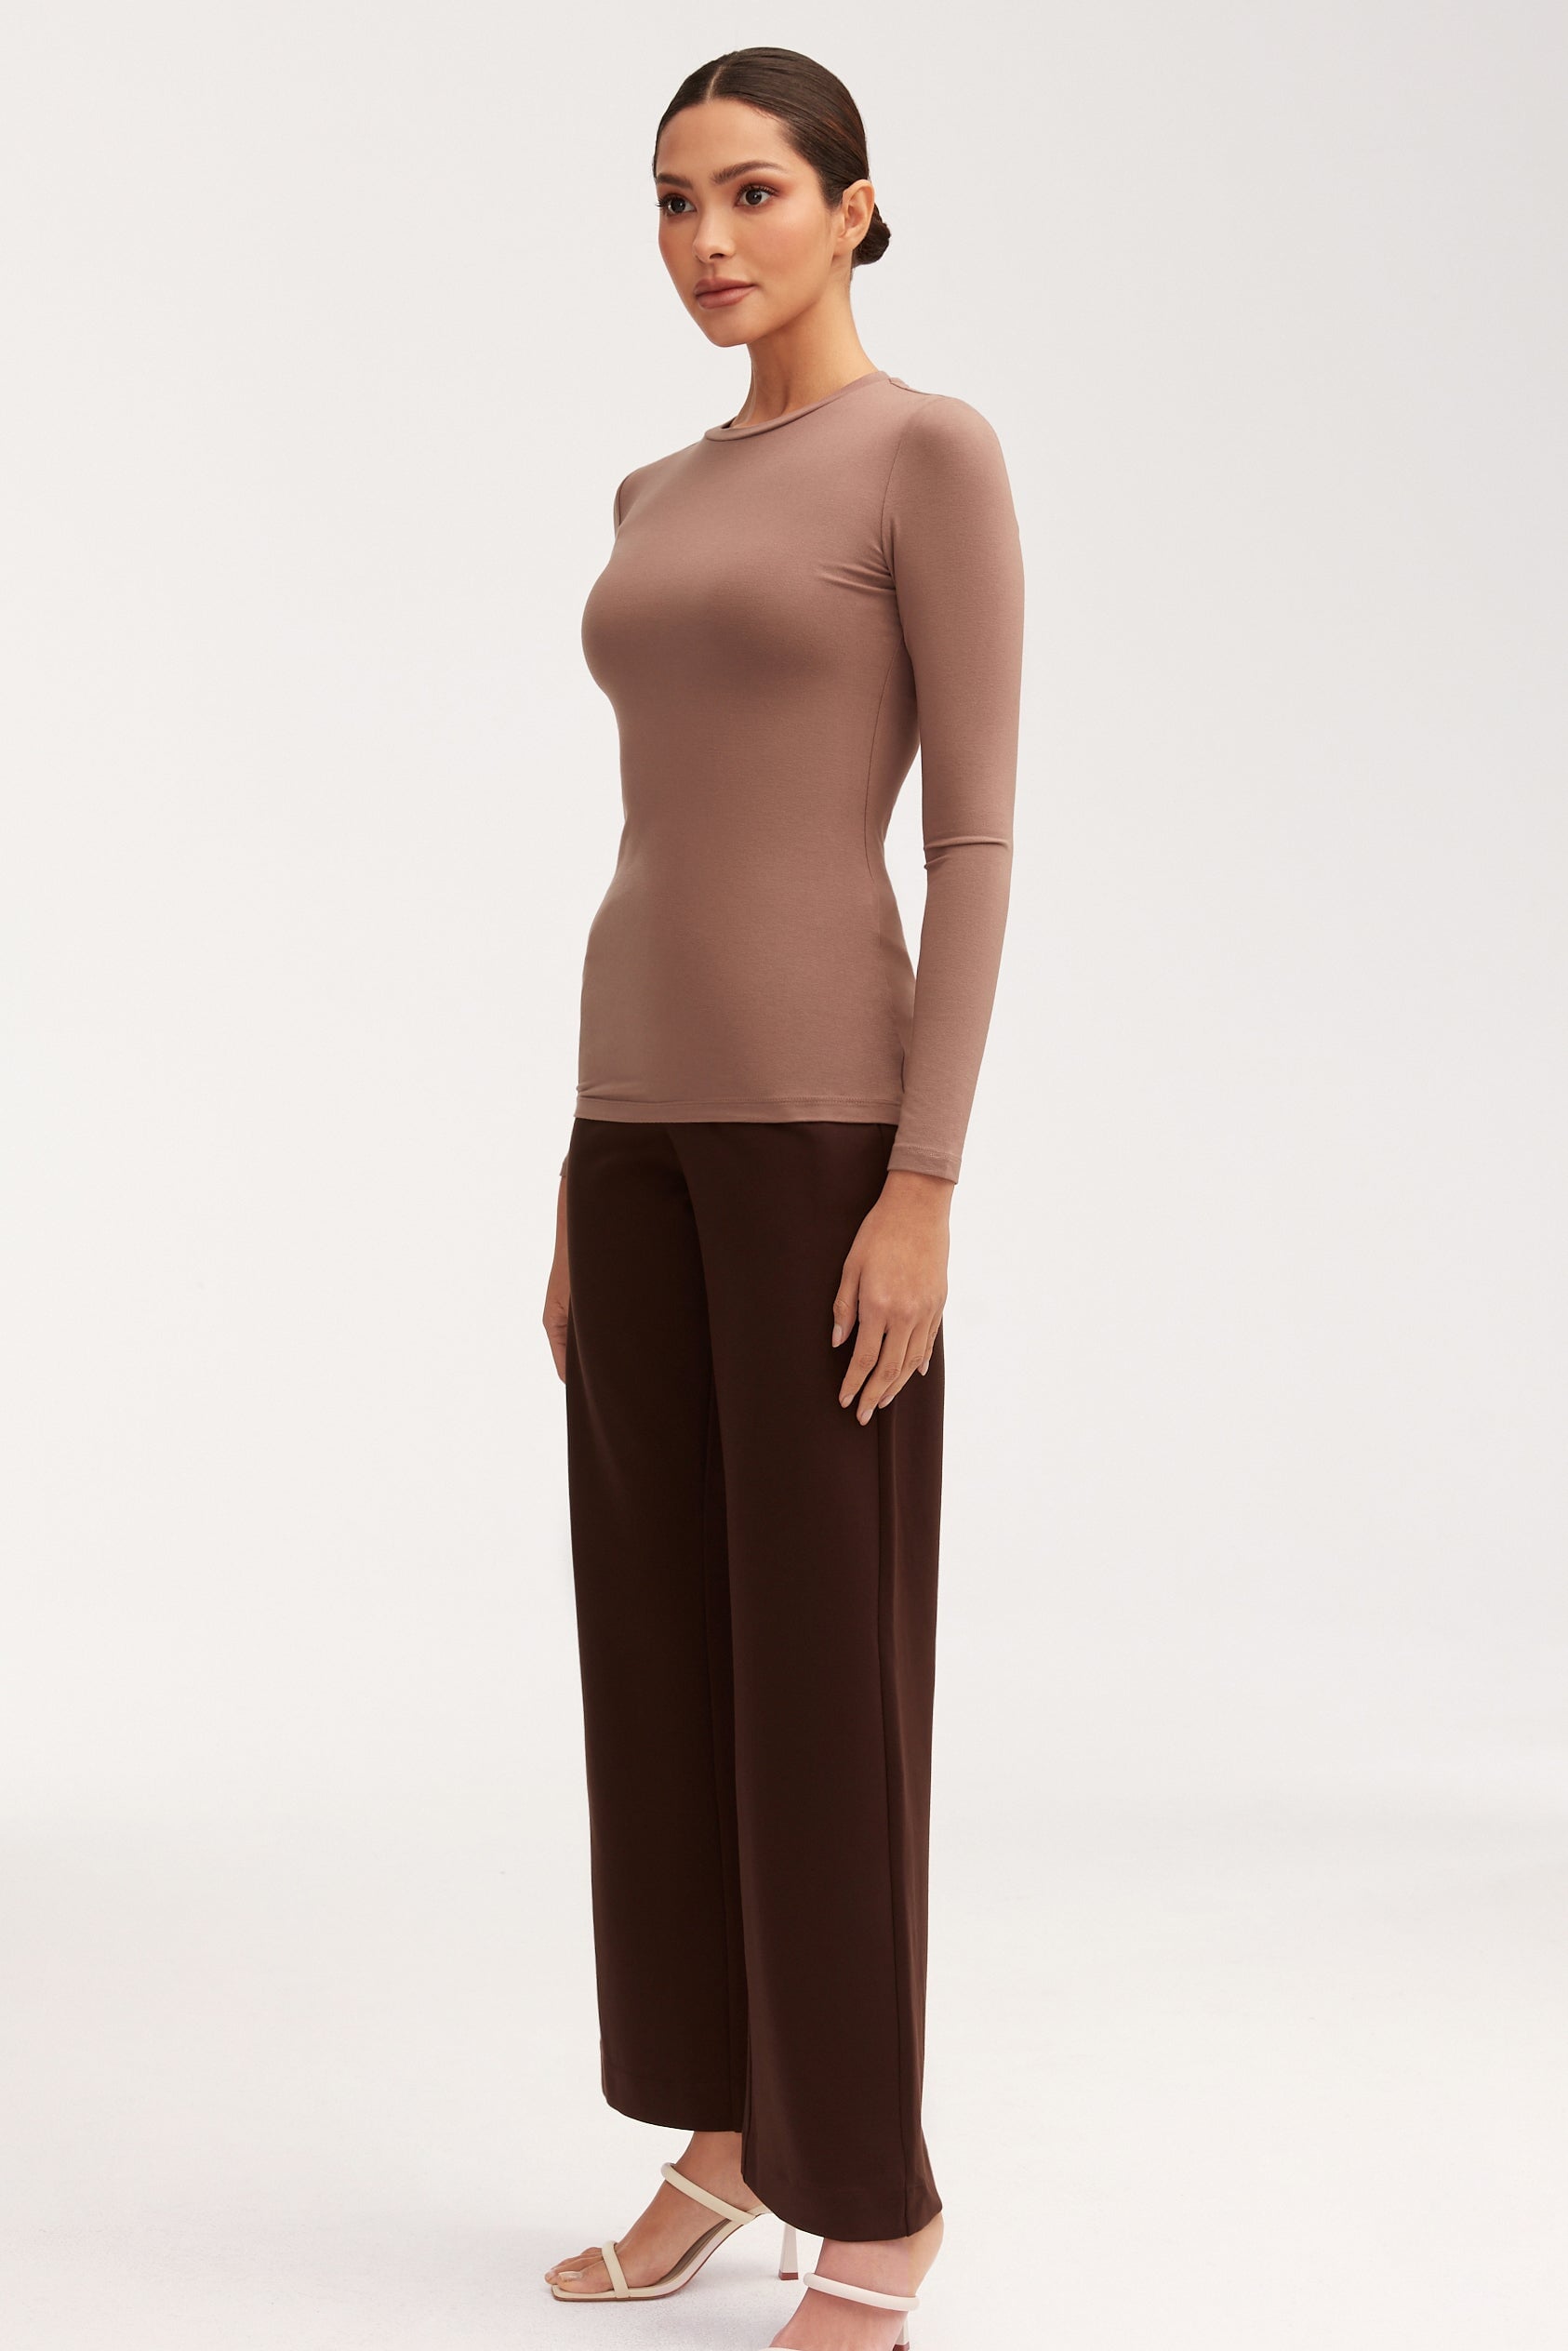 Essential Crew Neck Bamboo Jersey Top - Deep Taupe Tops Veiled 